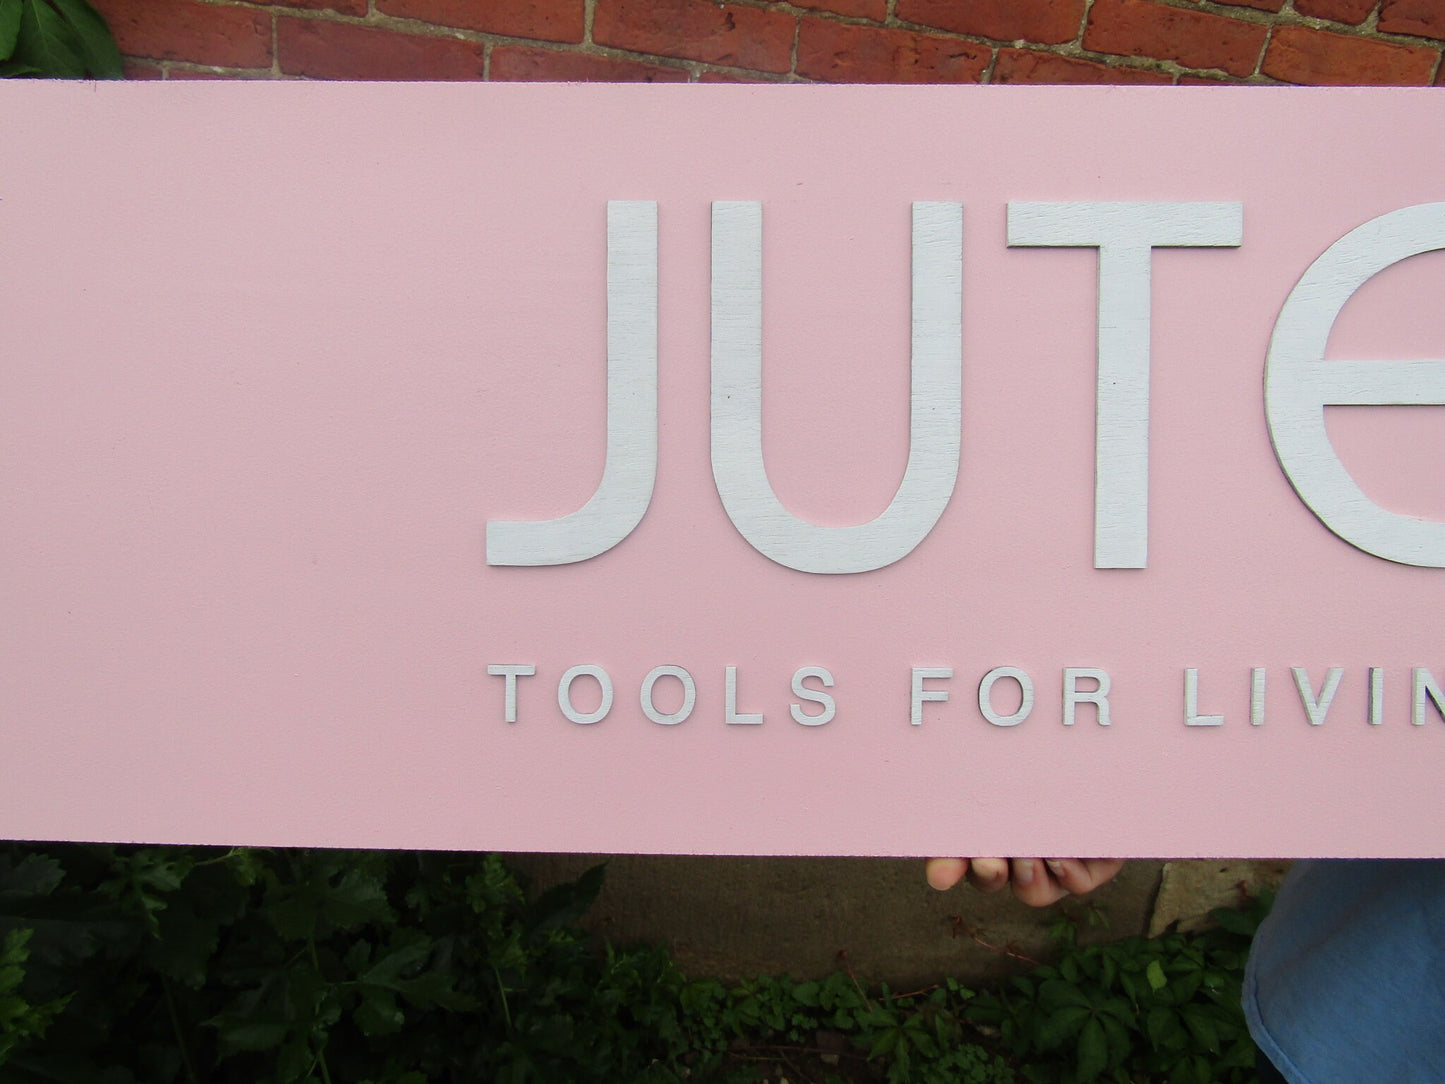 Custom Pink Rectangle Commerical Sign JUTE Tools for Living Health Wellness Therapy Office Signage Made to Order Your Logo Wooden Sign